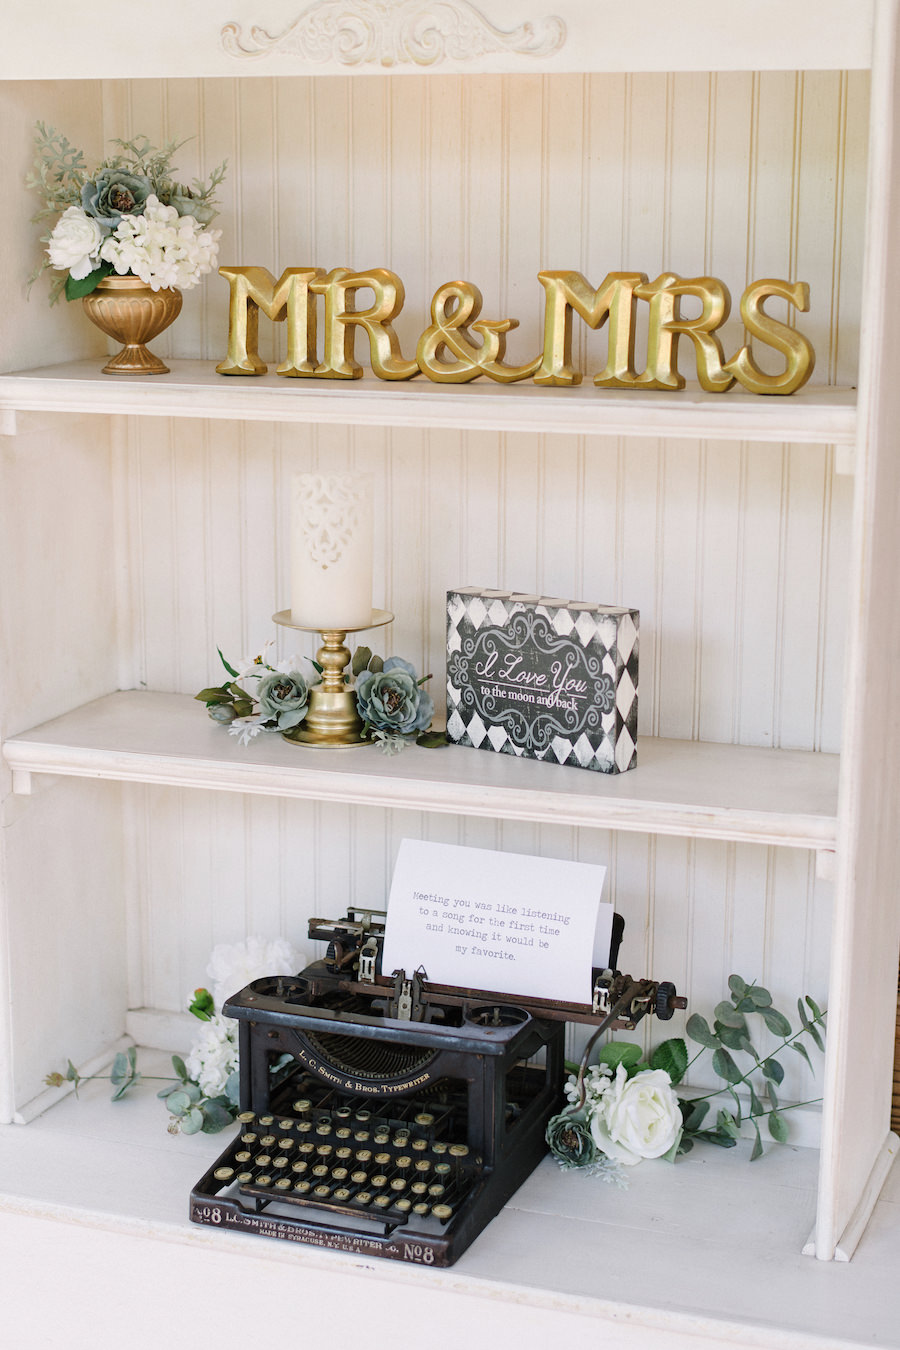 Rustic Vintage Wedding Decor with Vintage Typewriter, White Floral Accents and Gold Mr and Mrs Monogram